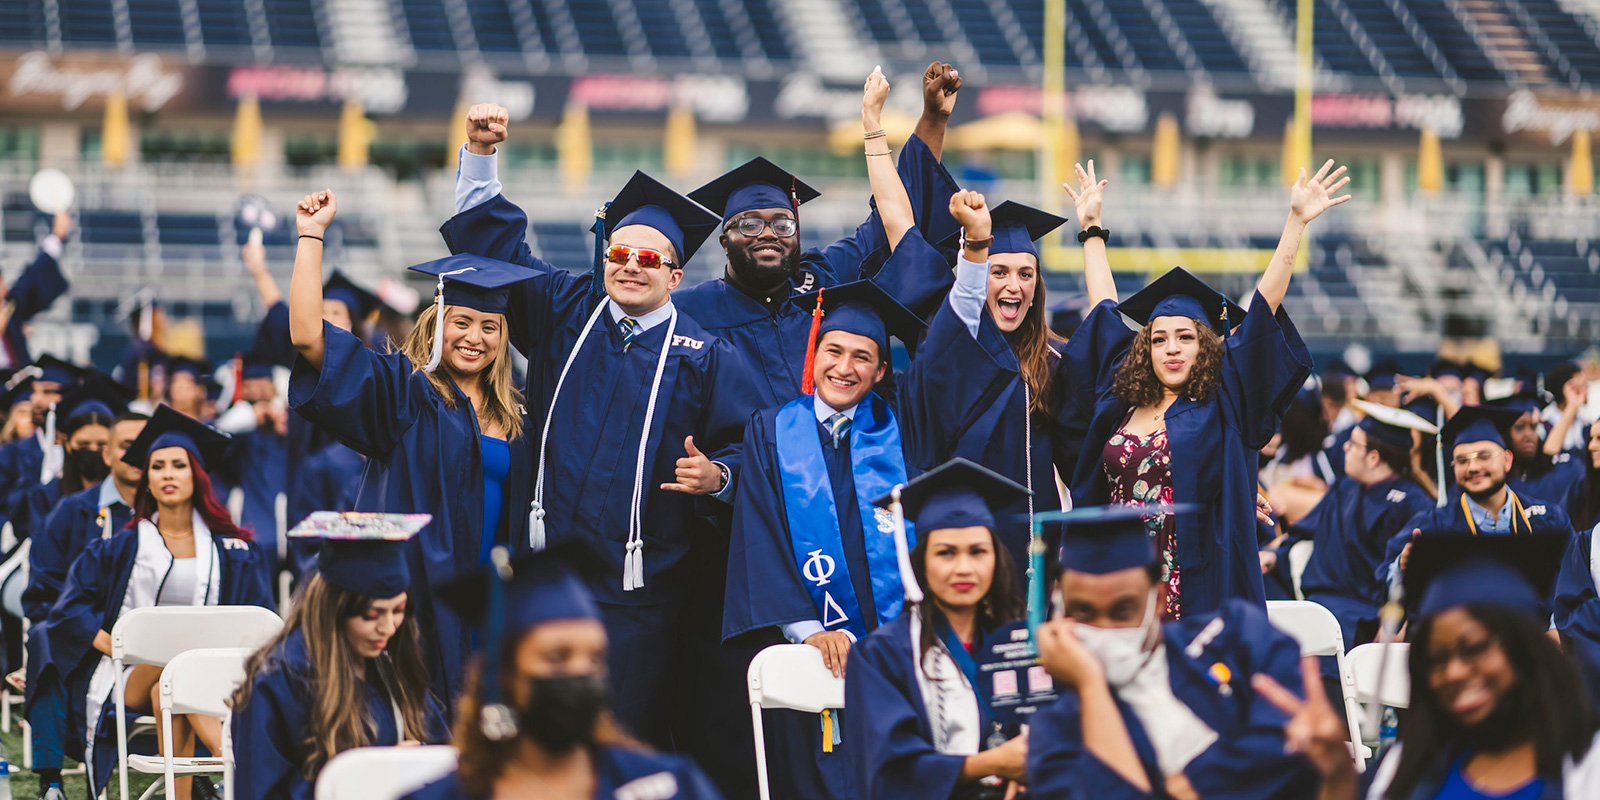 Diverse group of FIU graduates at commencement